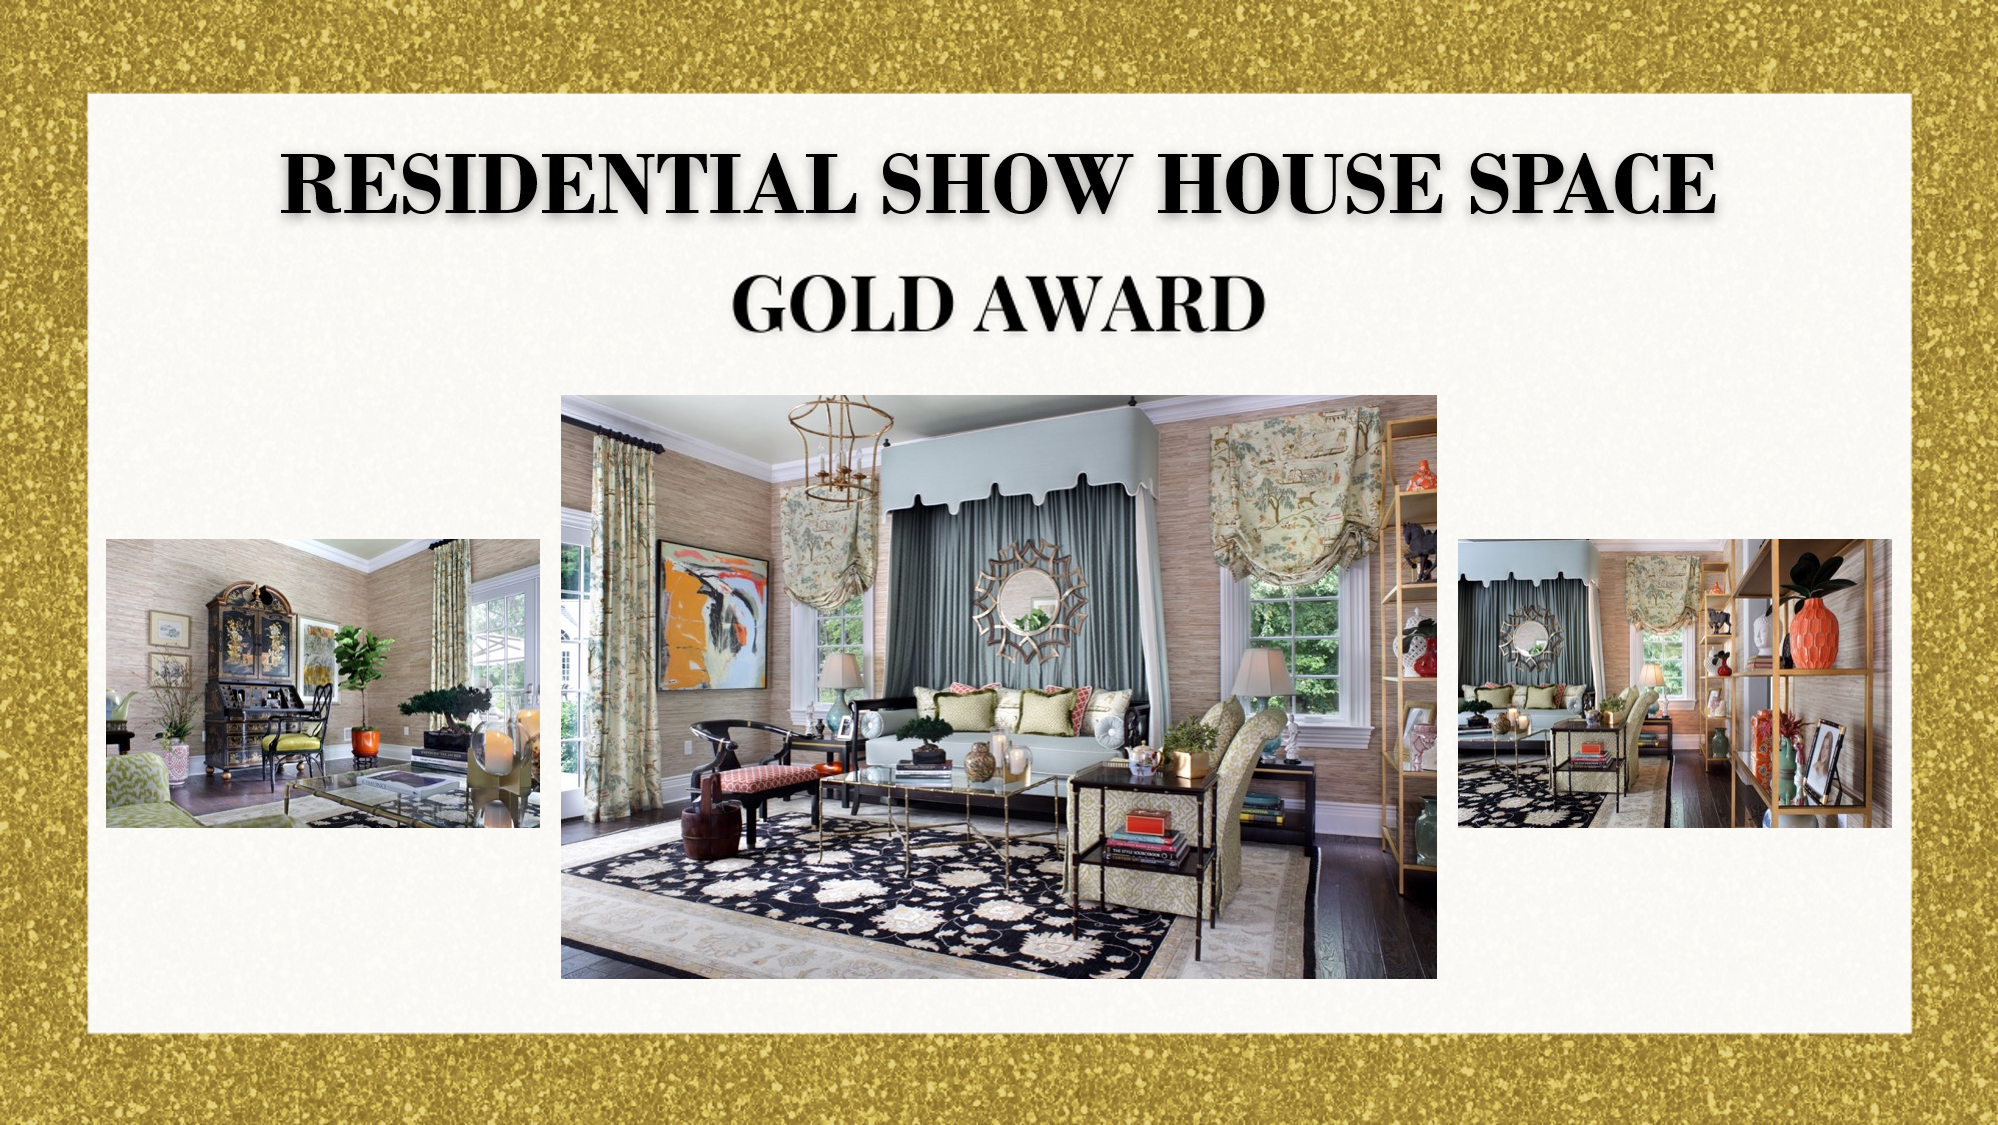 Gold Award Residential Show House Space